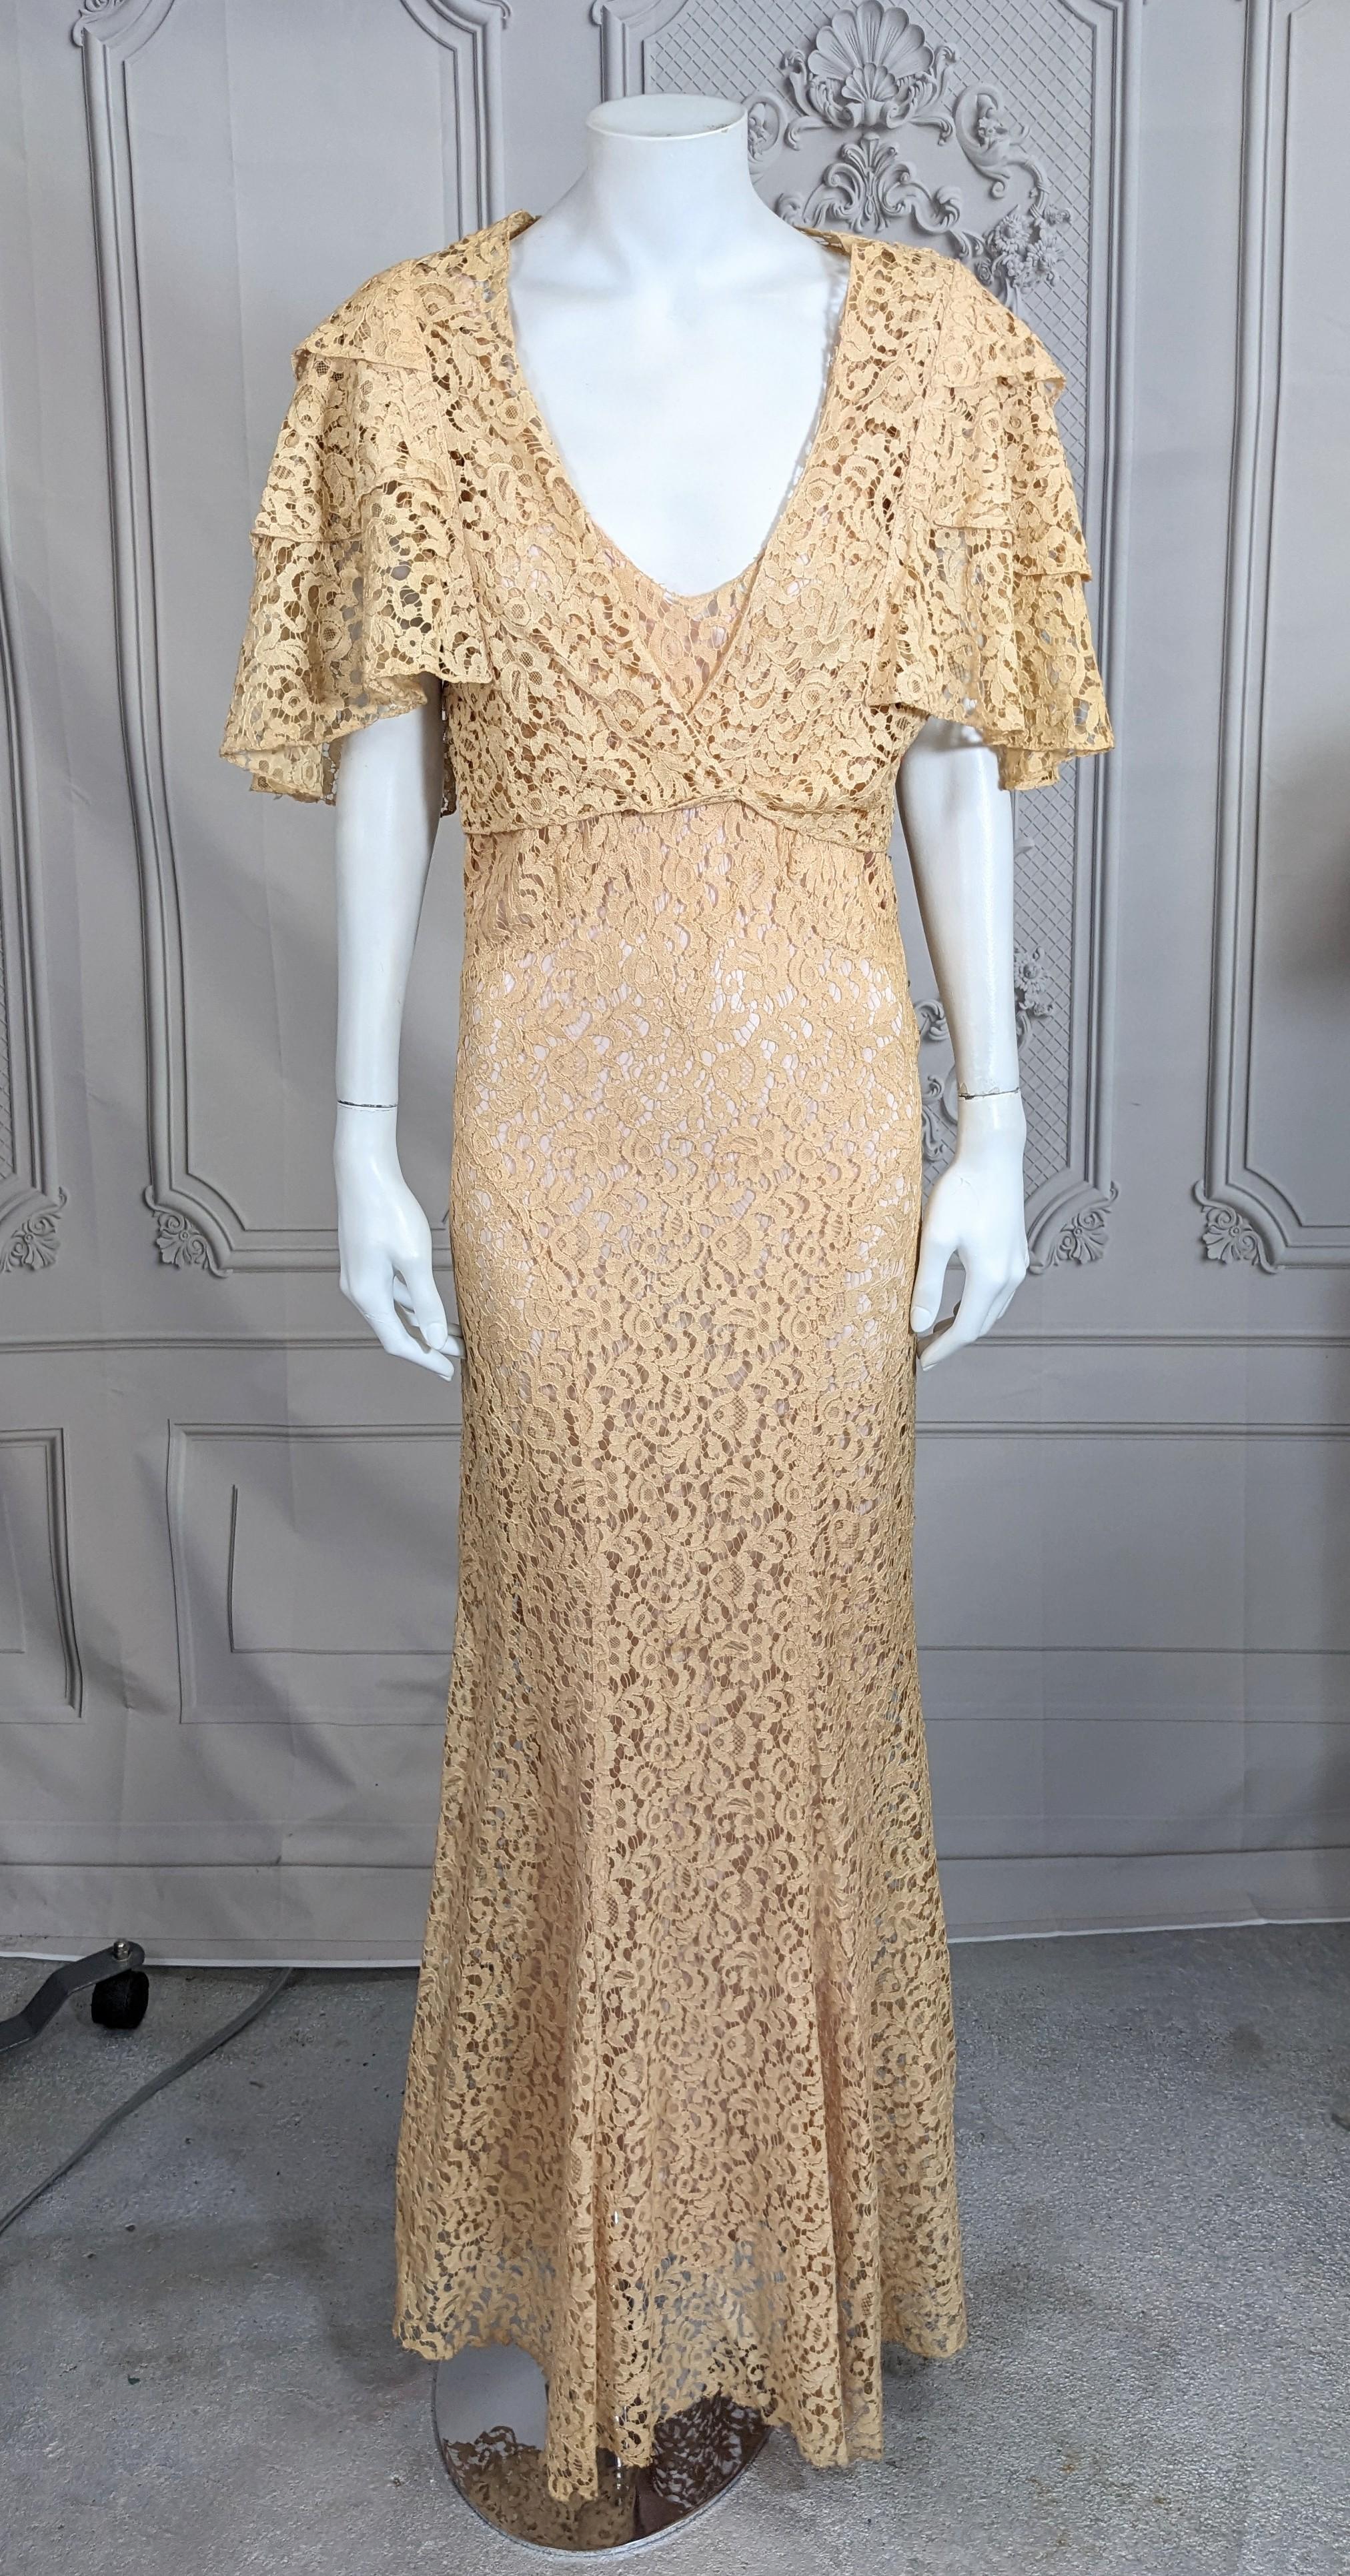 Lovely Art Deco Lace Evening Ensemble of cotton lace. Sleek gown with capelet bolero of 3 tier ruffled sleeves which snaps across the front. Typical Deco seaming on gown with deep V back neckline, fitted through torso which releases to fullness